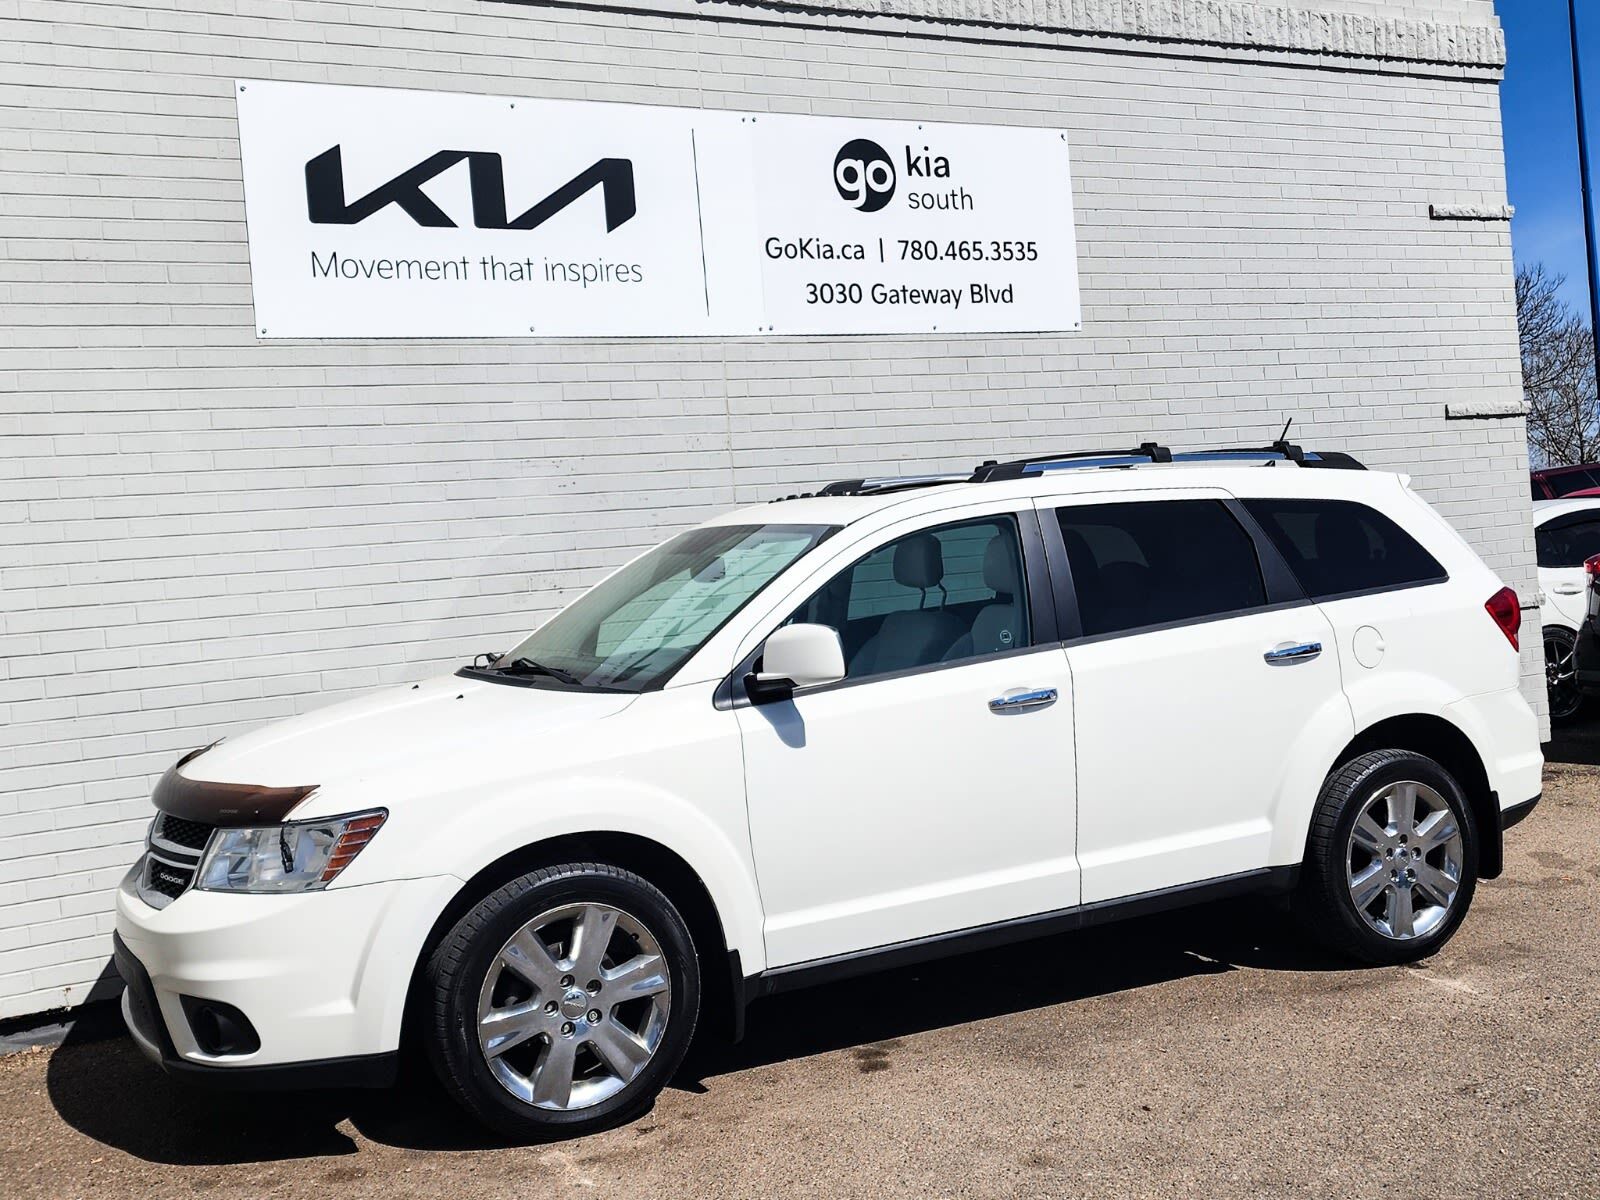 2012 Dodge Journey R/T: SUNROOF, CRUISE CONTROL, HEATED LEATHER SEATS